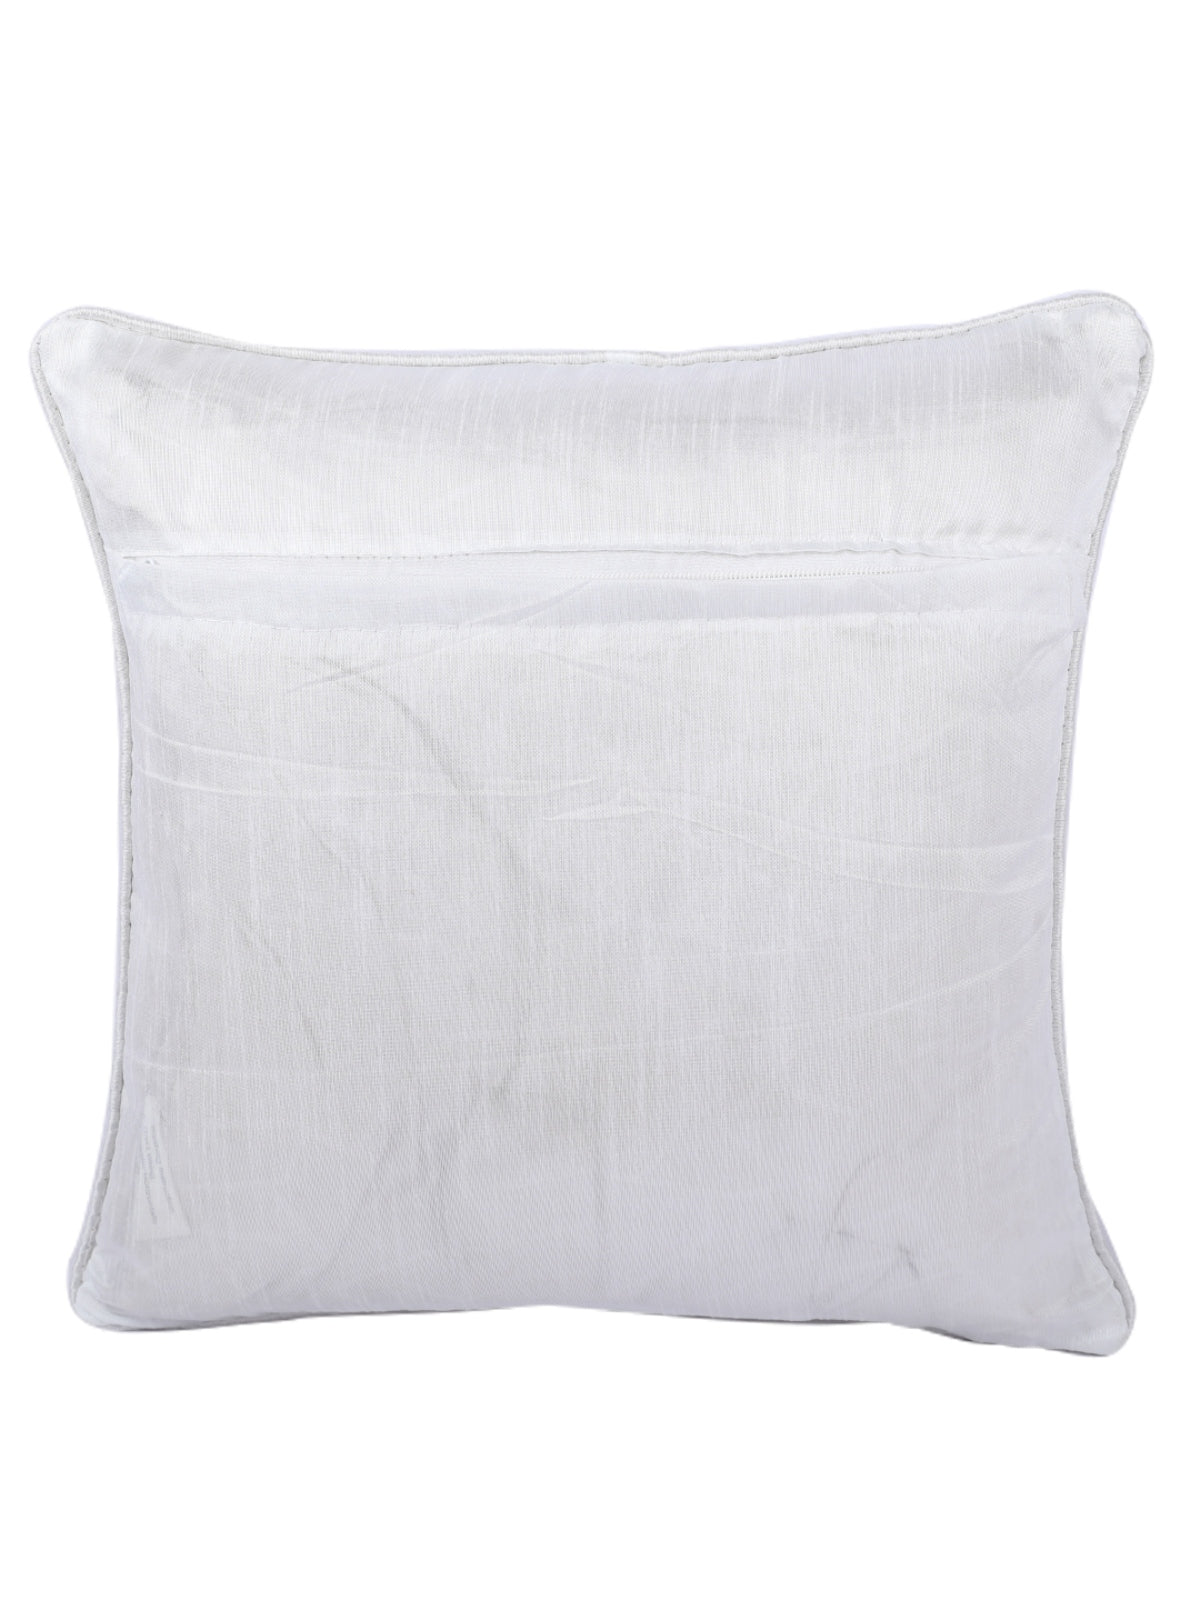 White Set of 5 Jacquard 16 Inch x 16 Inch Cushion Covers